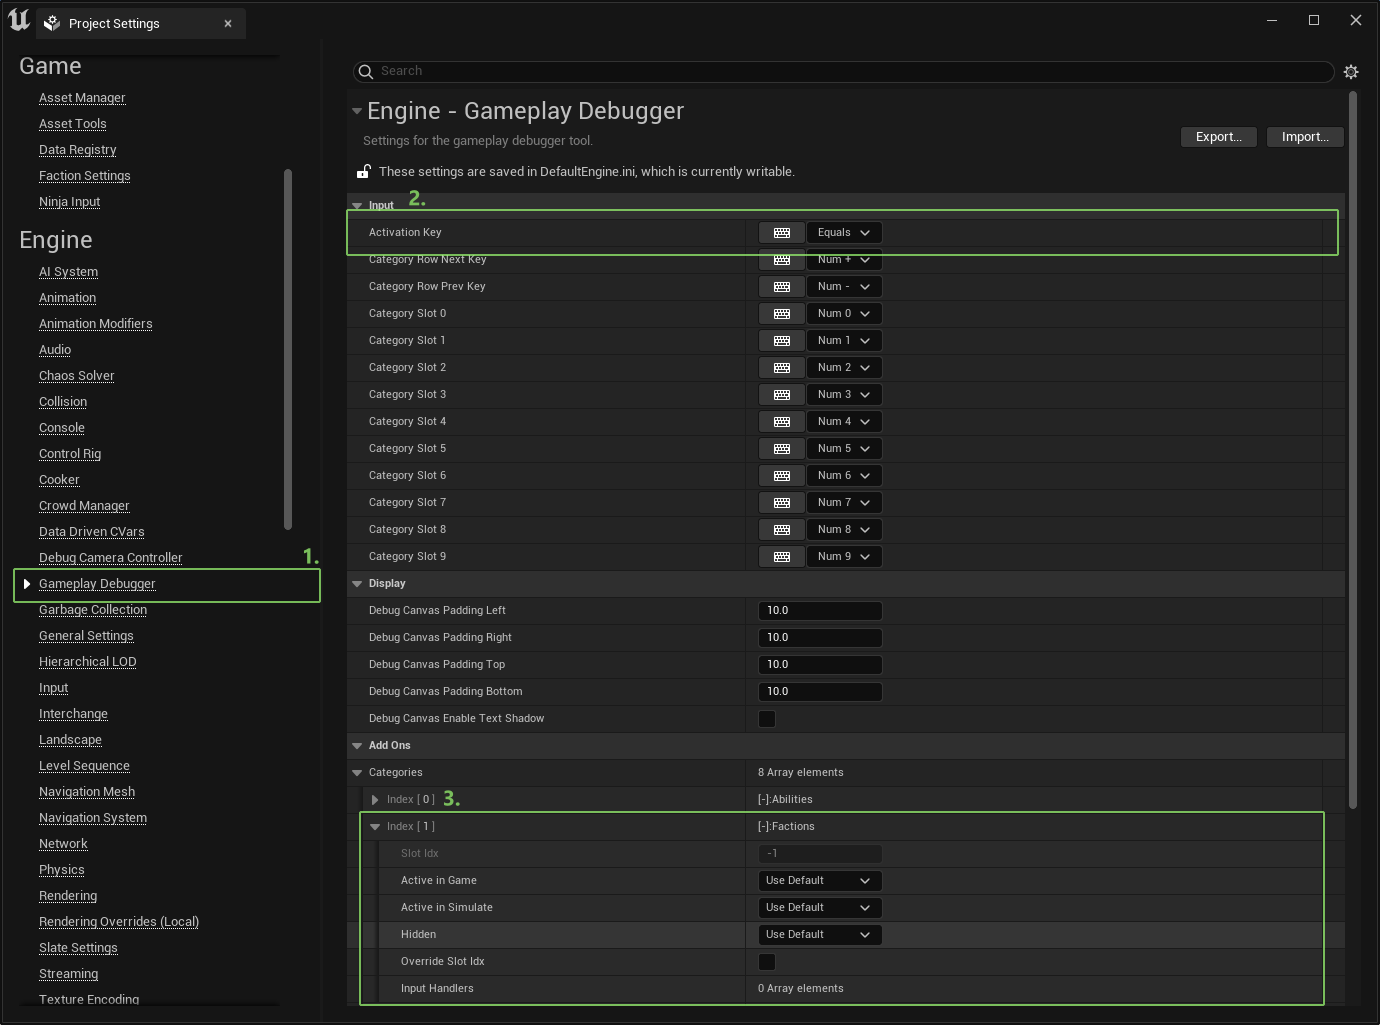 Configuring the Gameplay Debugger